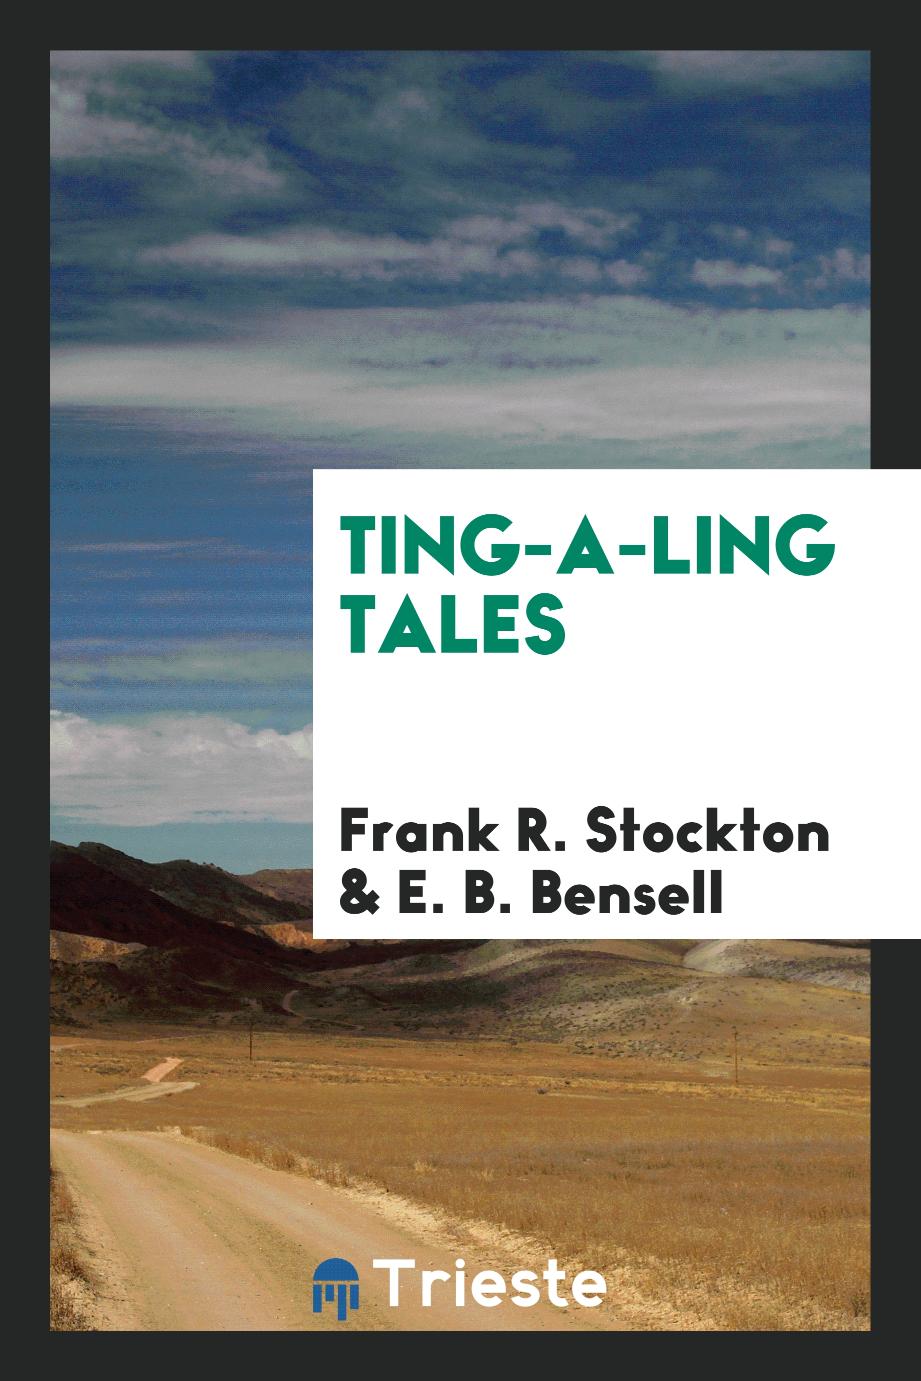 Ting-a-ling tales